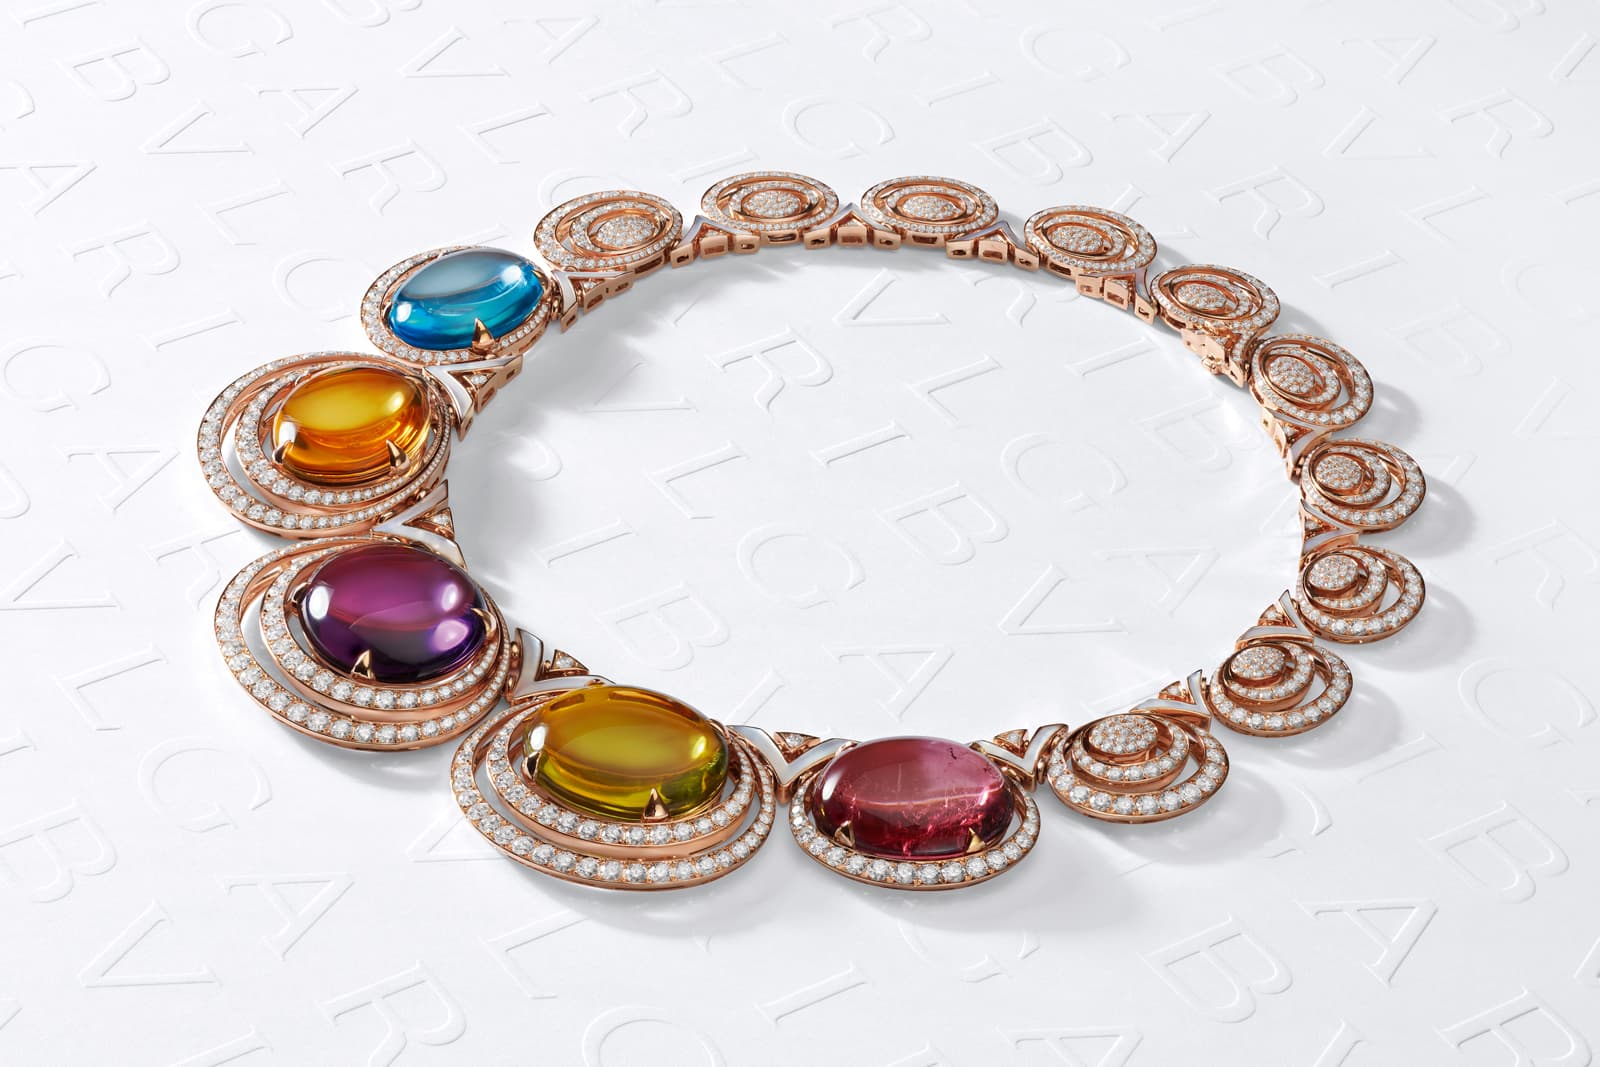 Bulgari Magnifica Colour Ripple High Jewellery necklace with 249.66 carats of oval-shaped blue topaz, citrine, amethyst, rubellite and tourmaline with diamonds